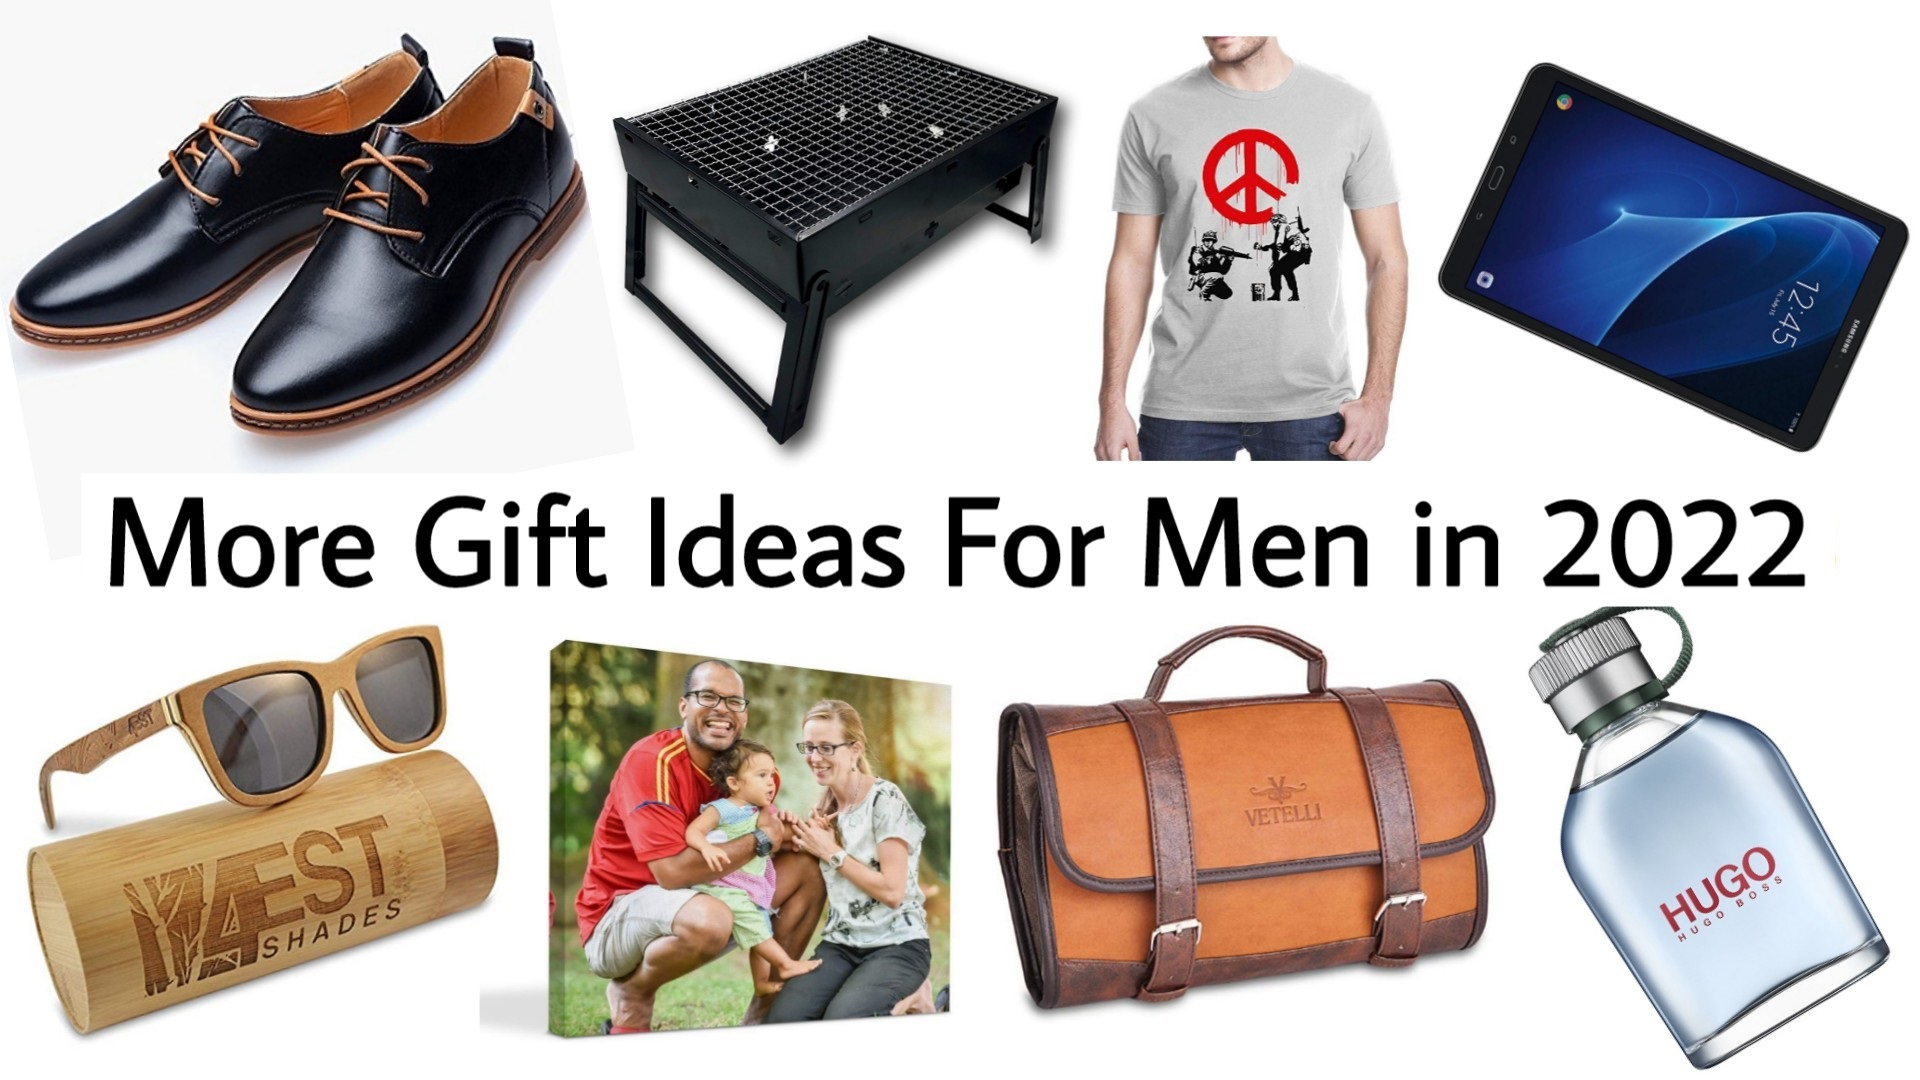 2022 Top 10 Gift Ideas for Men - Top 10 Birthday Gifts for Men 2022